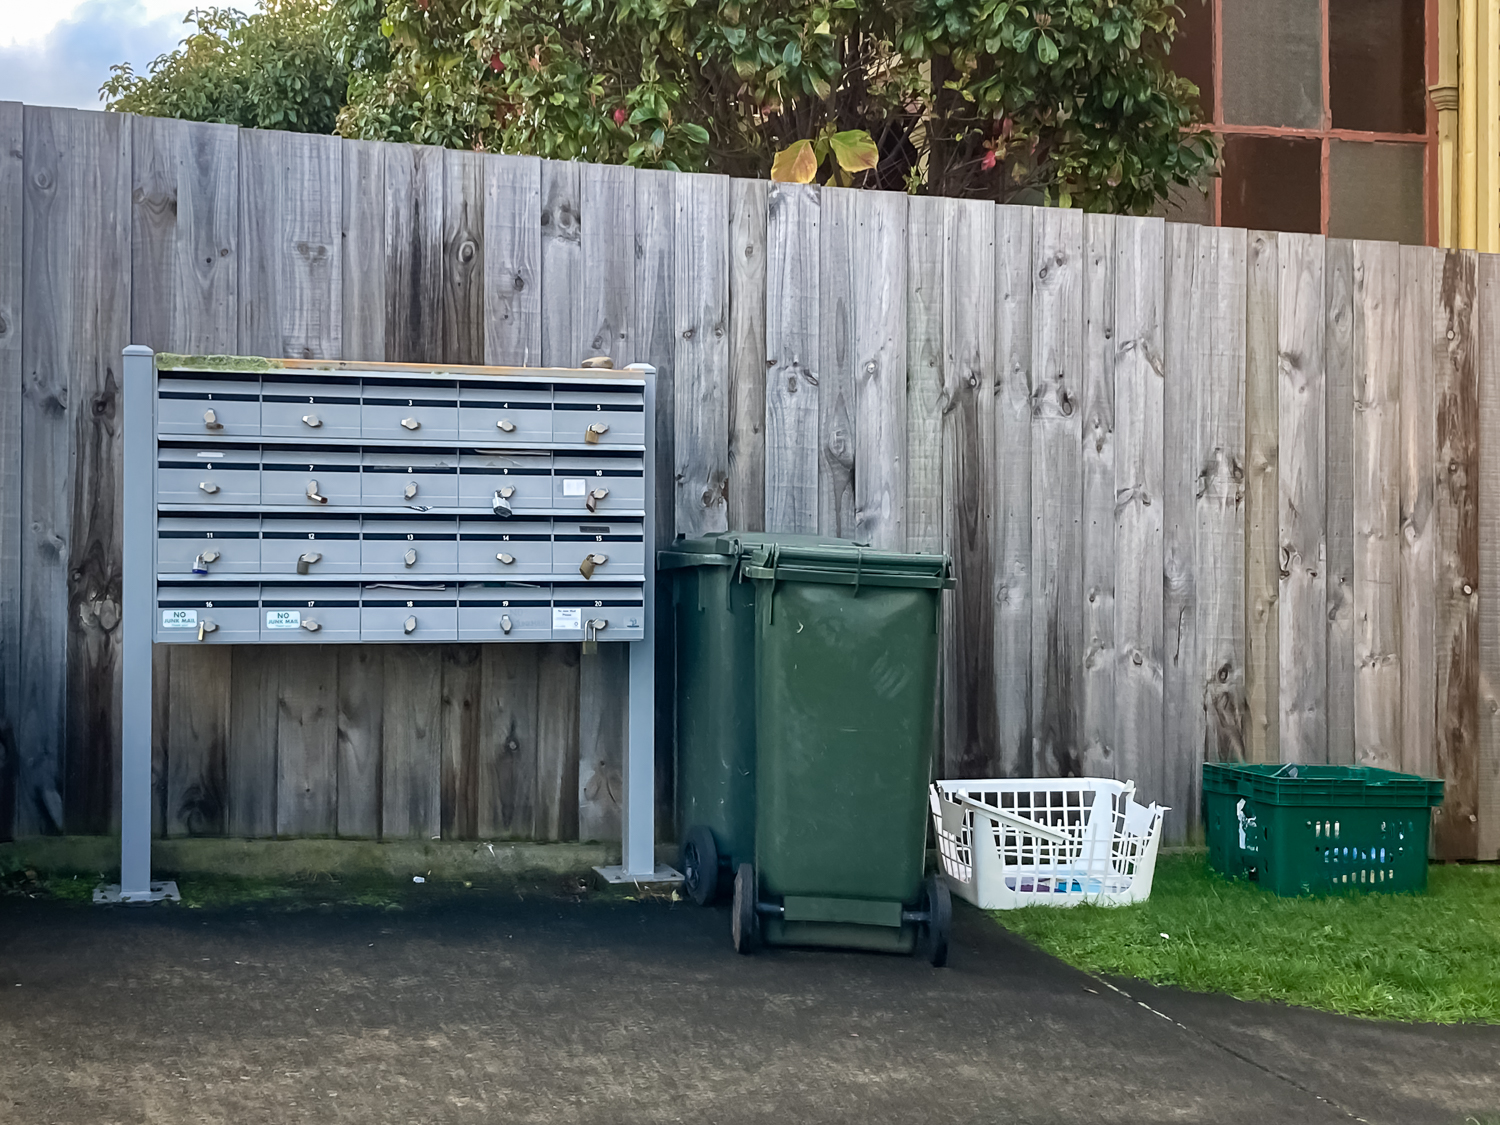 A silver multi-box letterbox, green bins and a white plastic basket in front of a fence